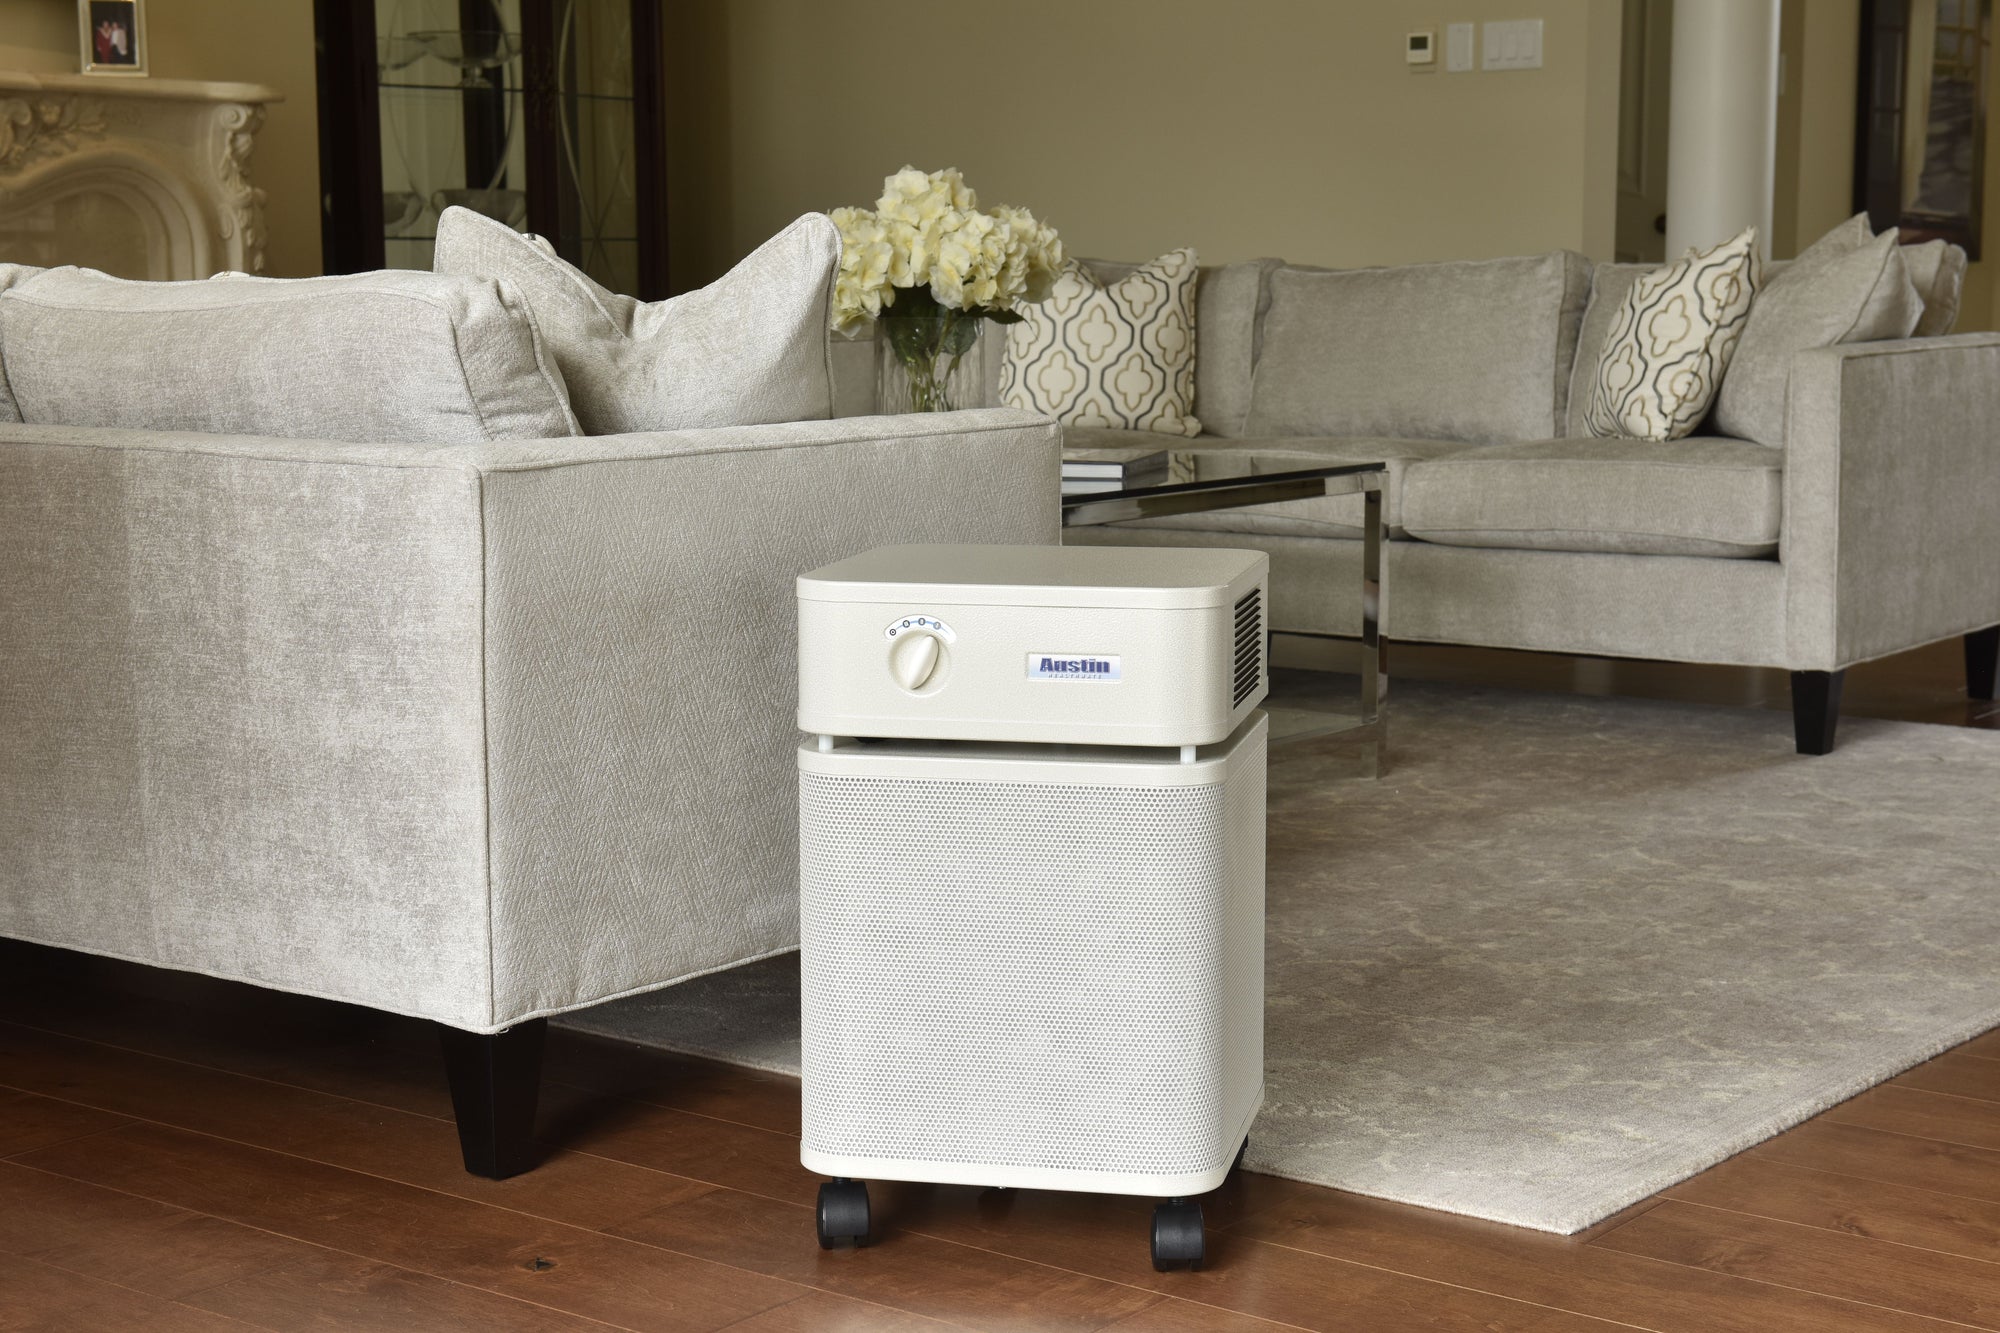 Modern living room showing the Austin Air Healthmate Air Purifier shown in the sandstone color. Nice looking unit.